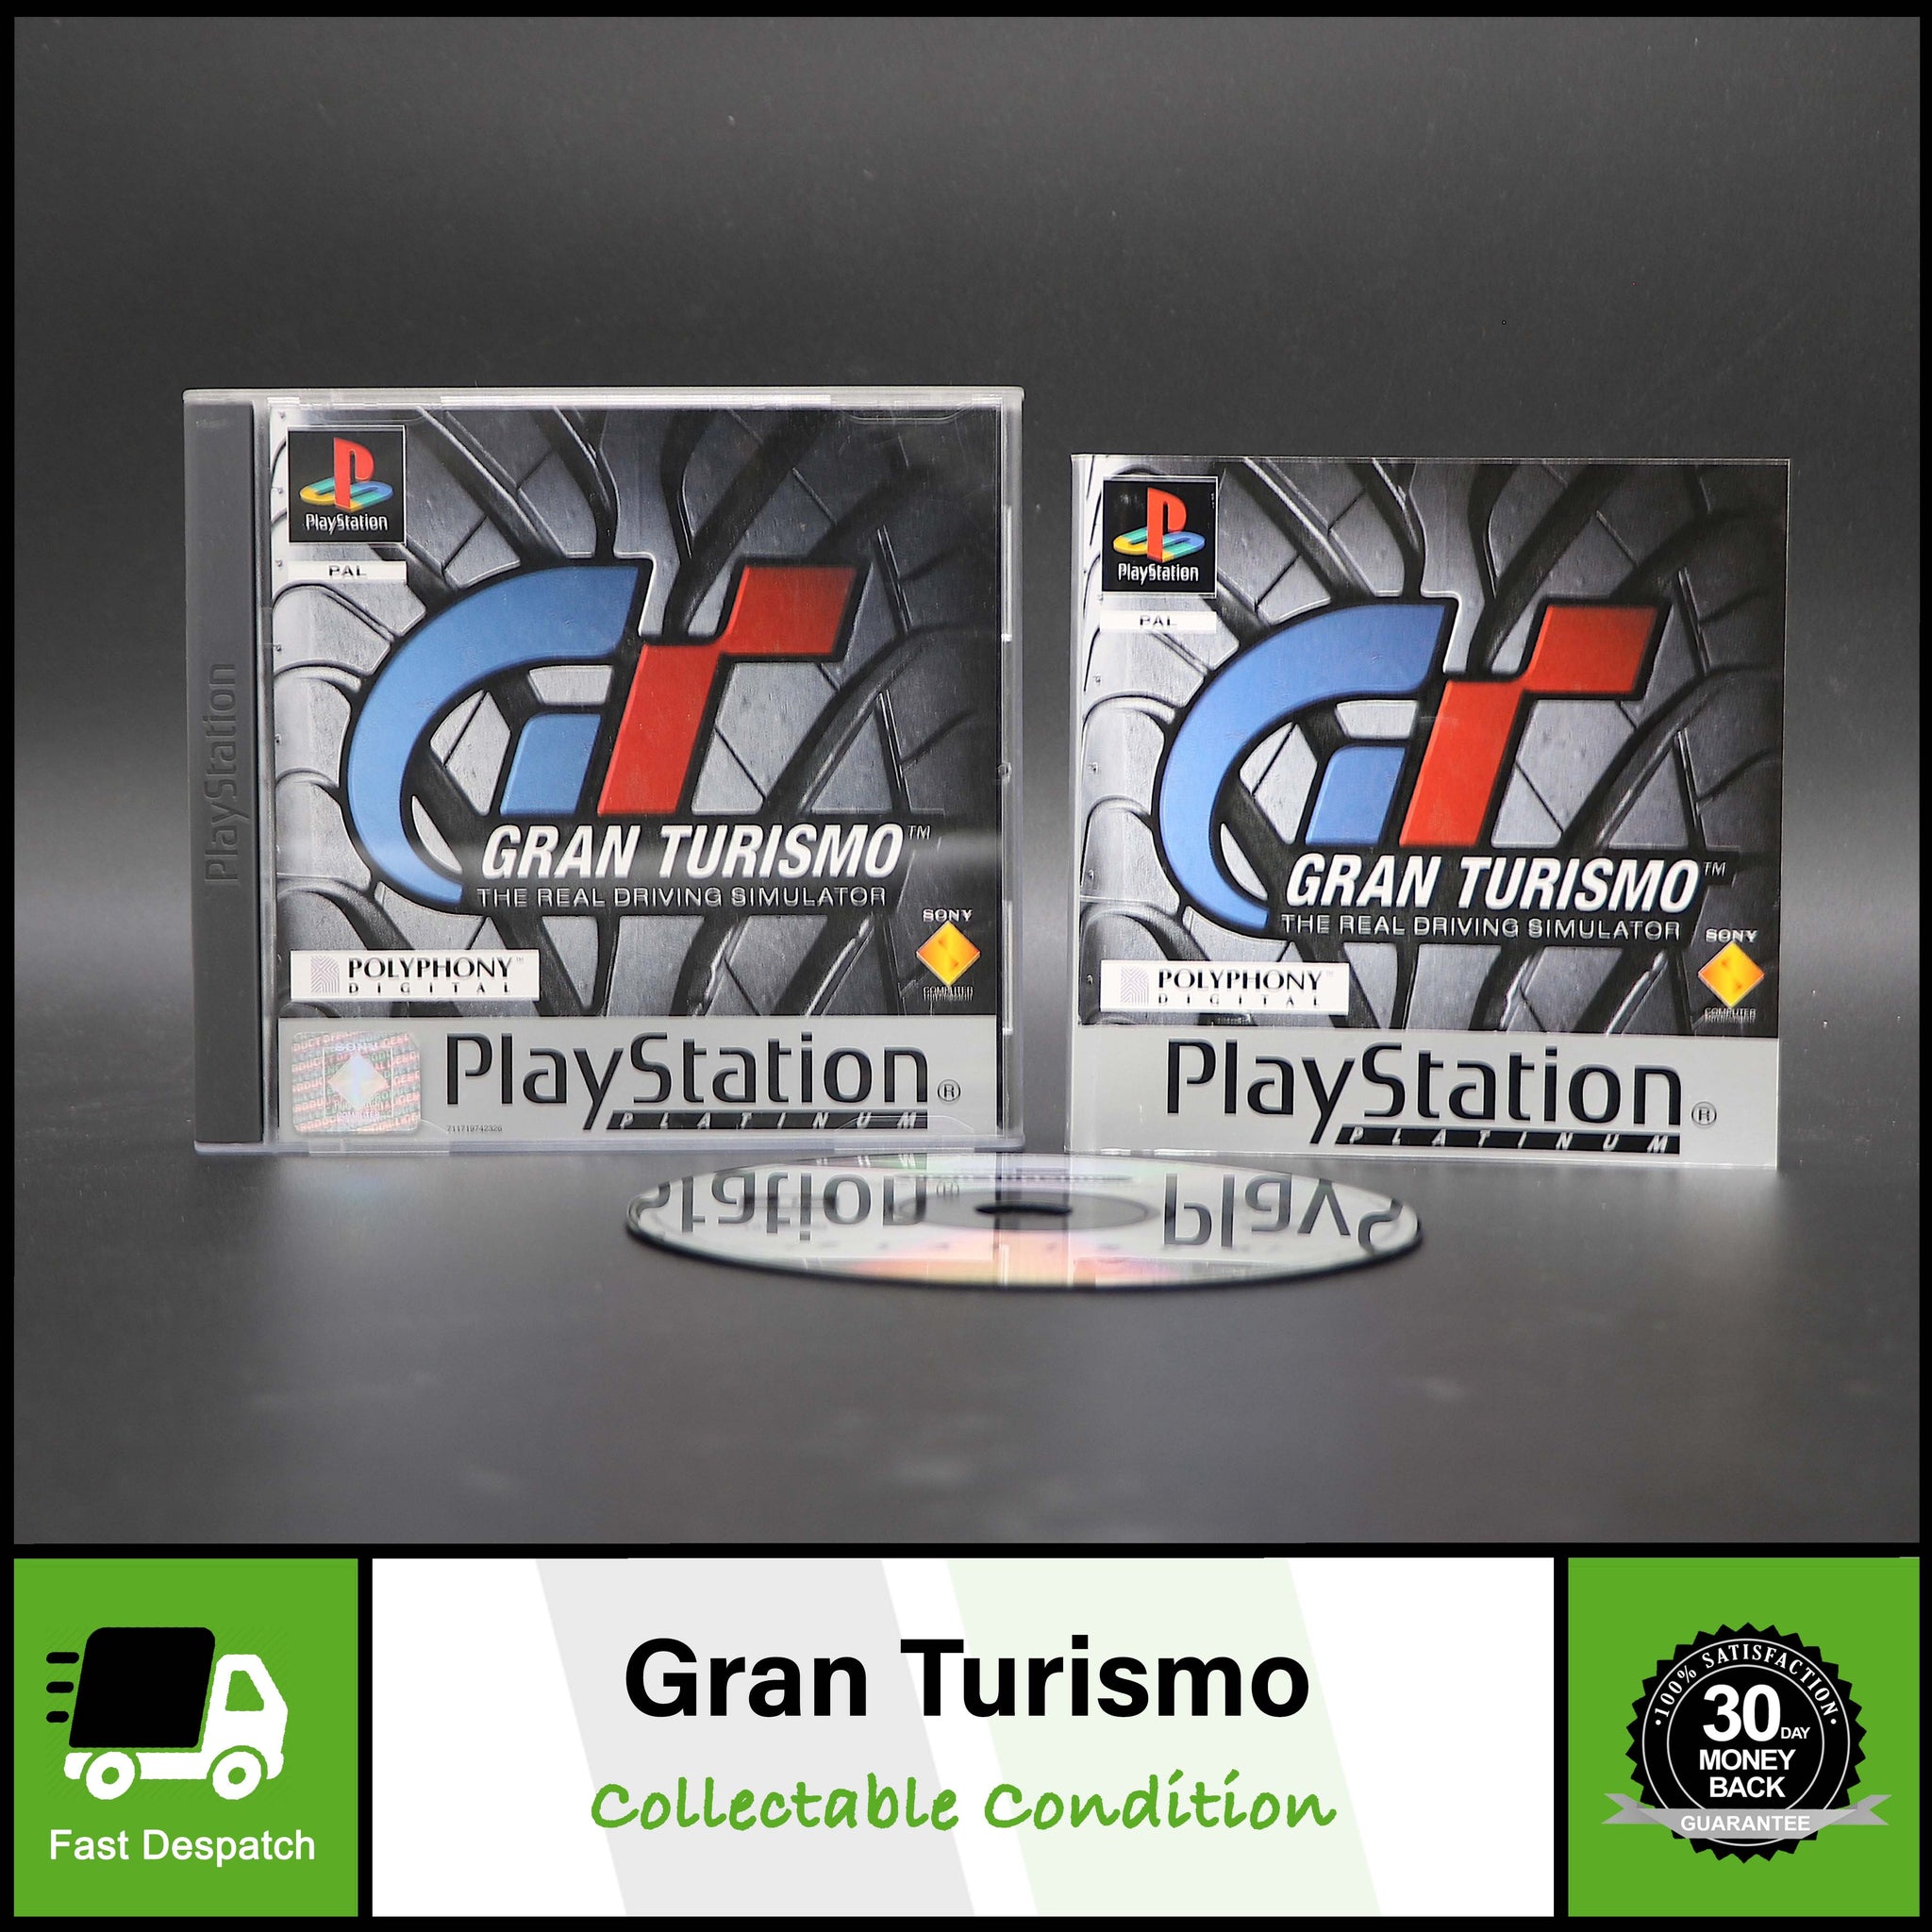 Gran Turismo | Platinum Sony Playstation PSONE PS1 Game | Collectable Condition!